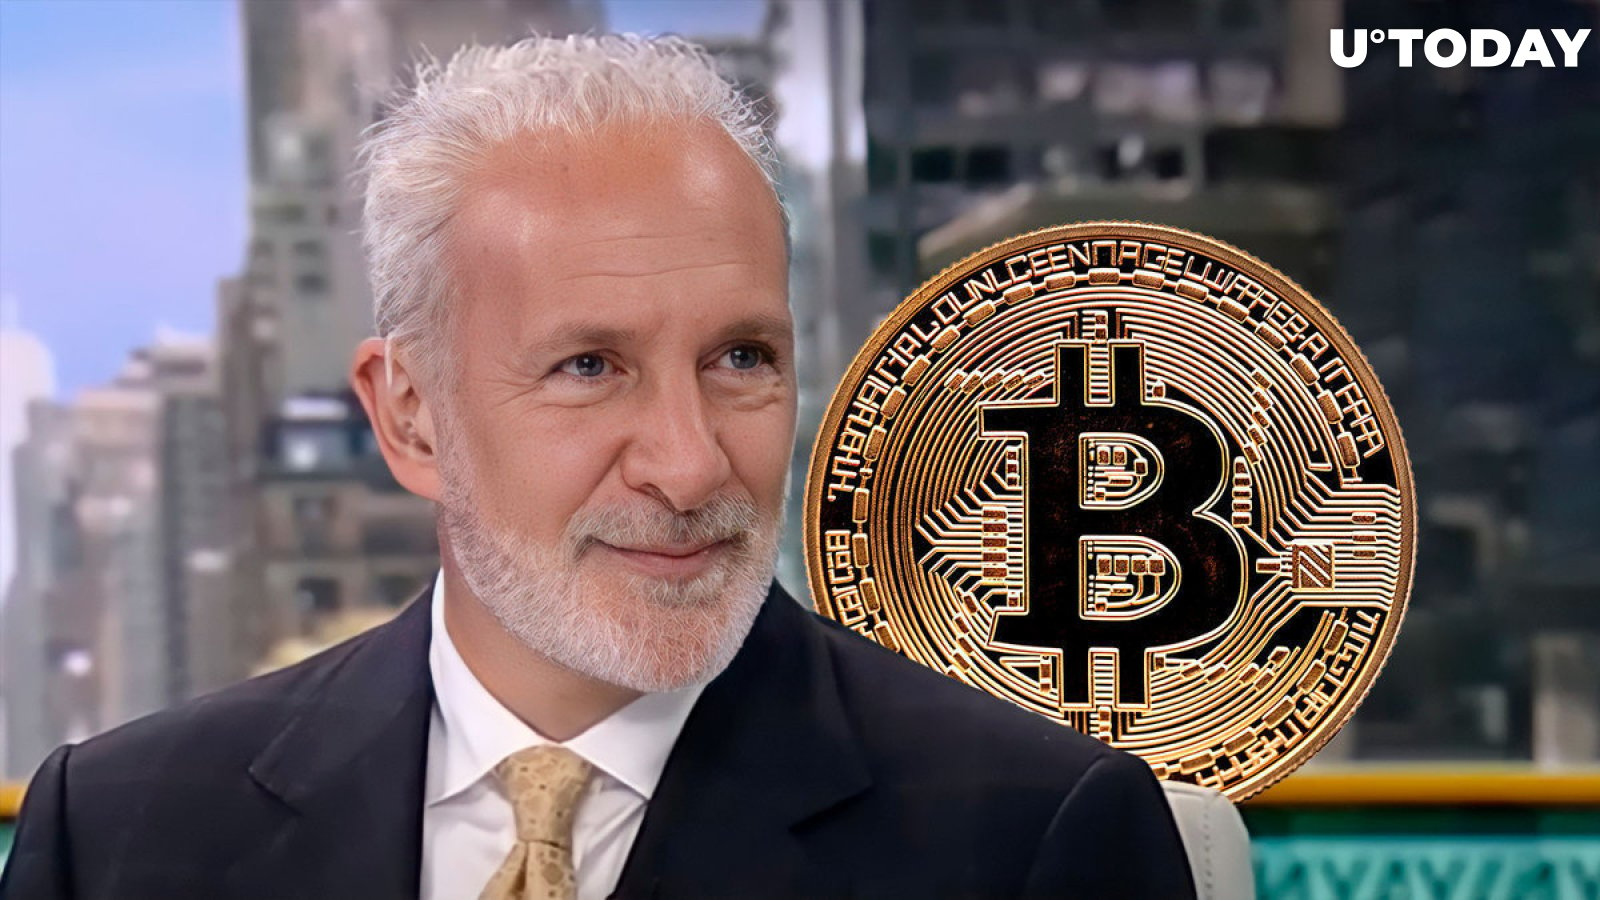 Peter Schiff on Bitcoin Crash: The Bear Is Still Young